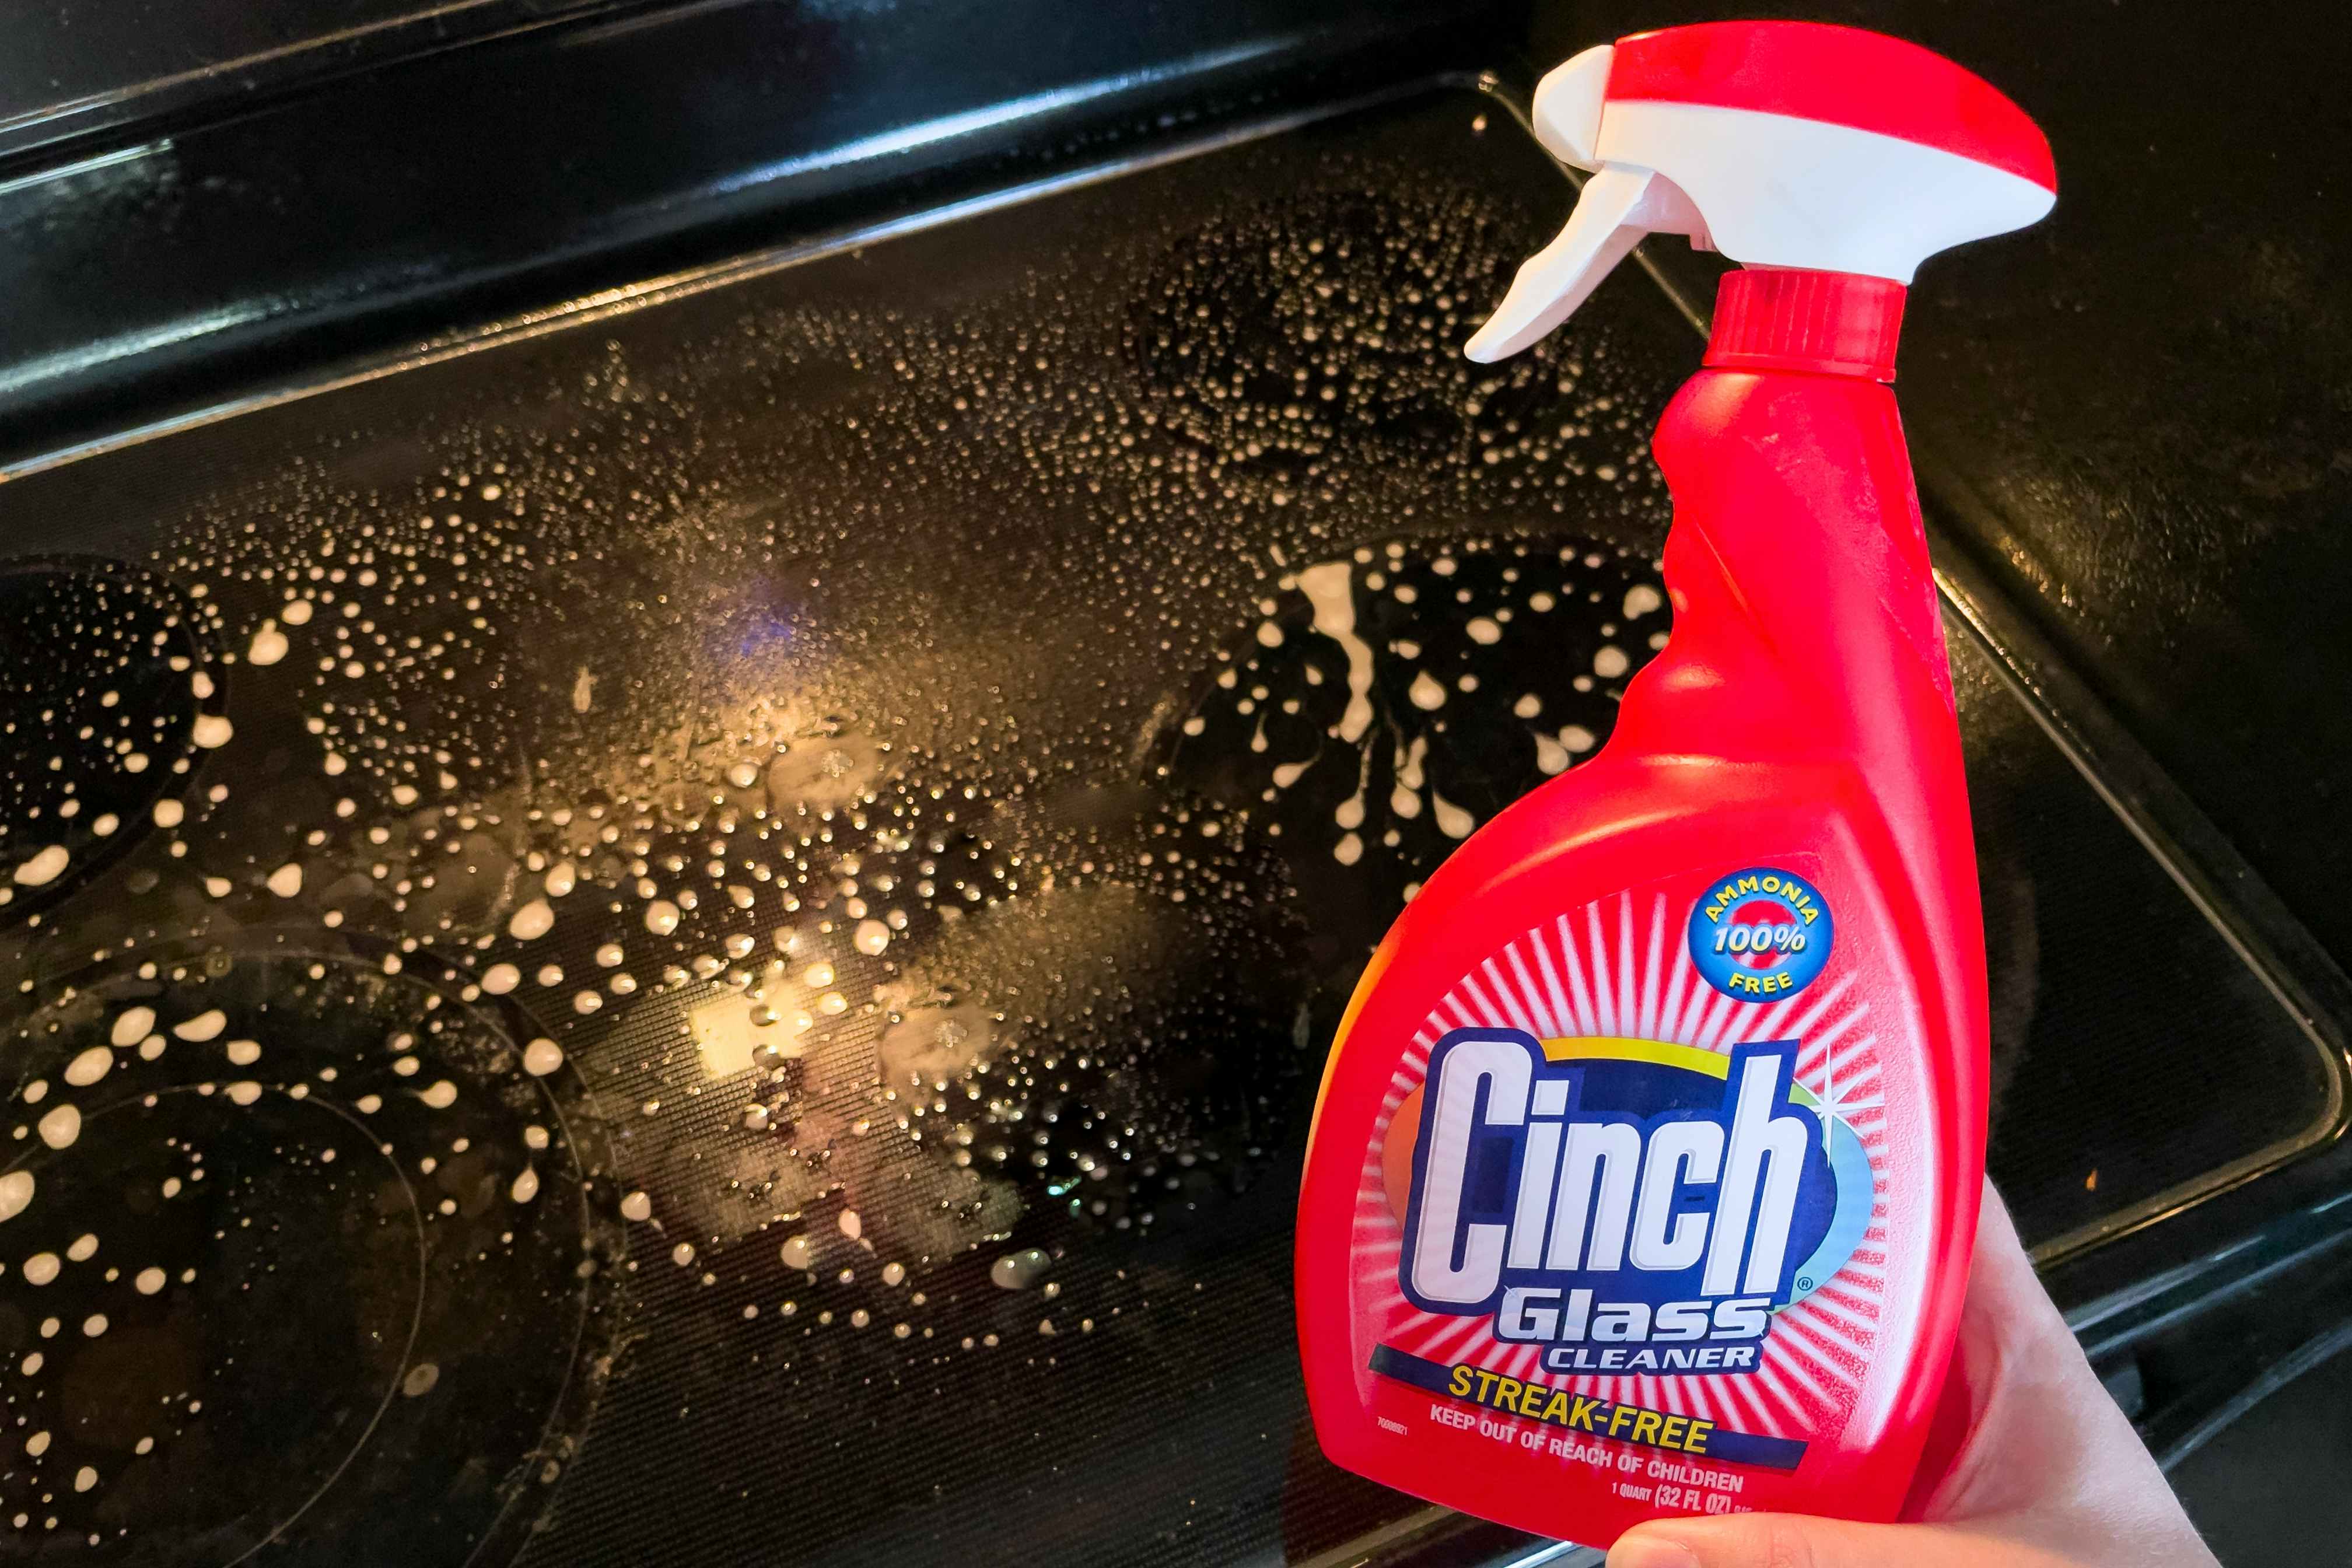 Cinch Glass cleaner held next to a glass top stove.